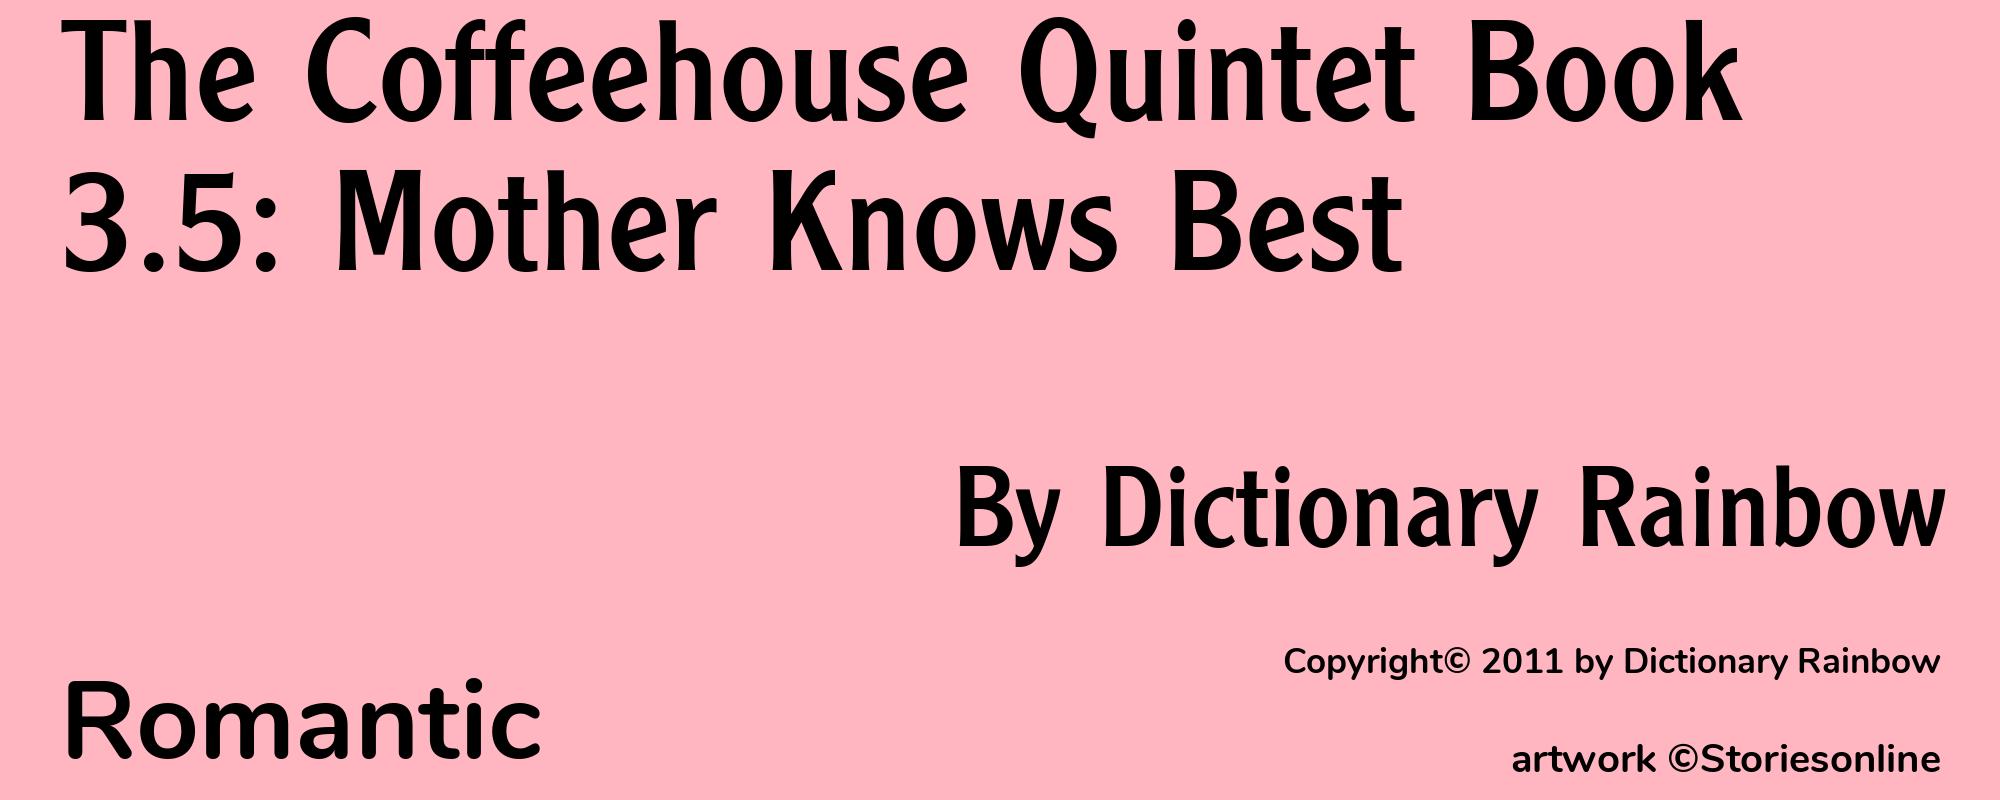 The Coffeehouse Quintet Book 3.5: Mother Knows Best - Cover